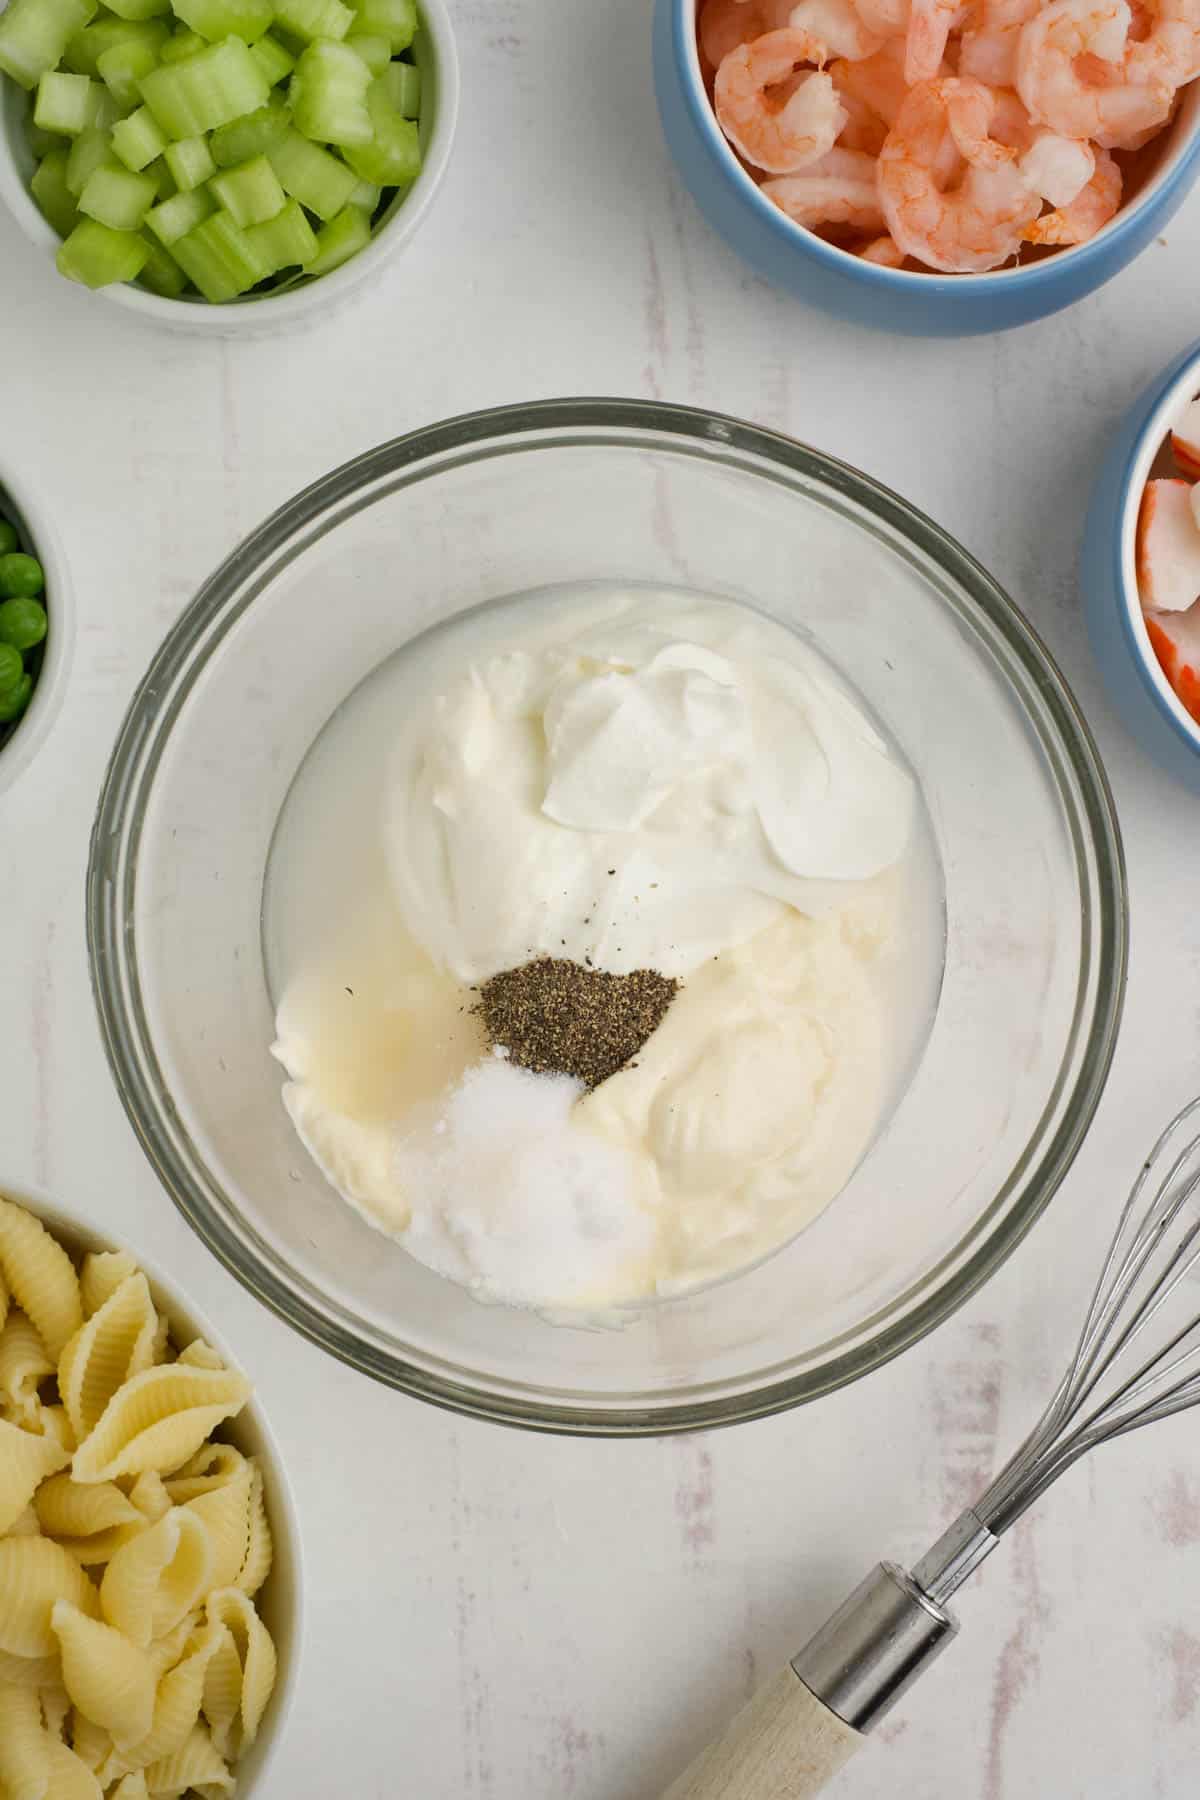 Combining creamy dressing ingredients in a bowl.